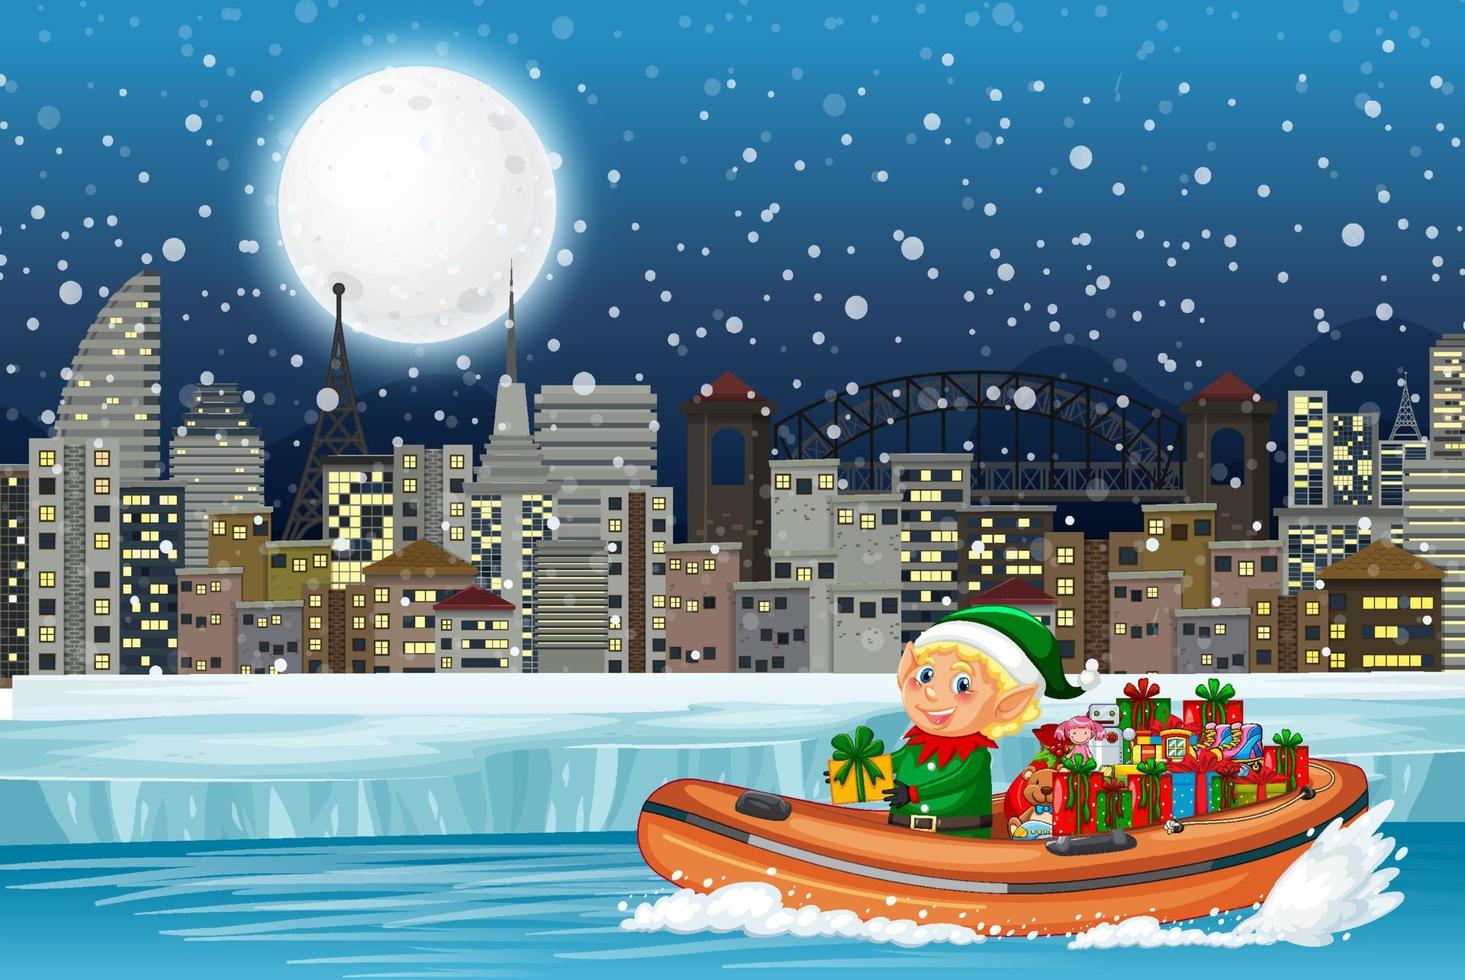 Snowy night with cute elf delivering gifts by speedboat vector